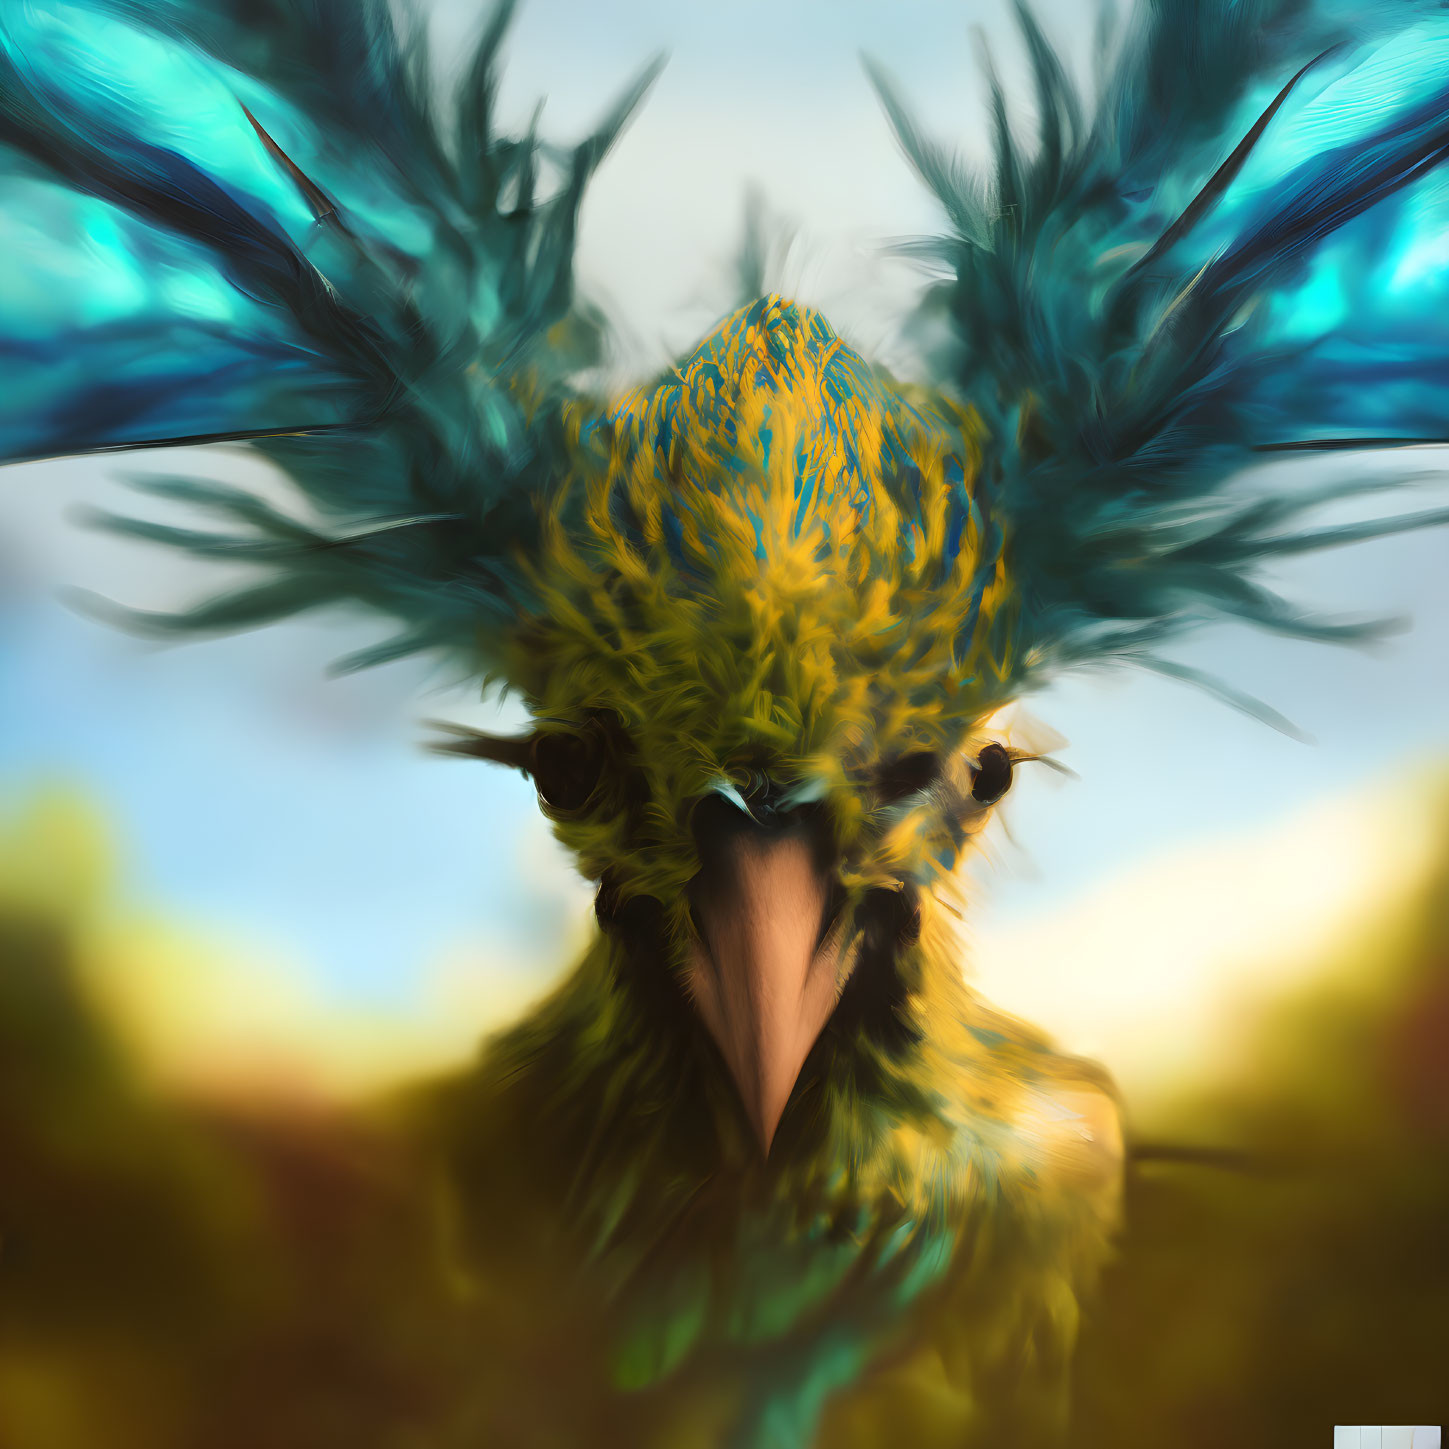 Colorful digital artwork of a bird with flowing feathers in blue and green against a blurred background